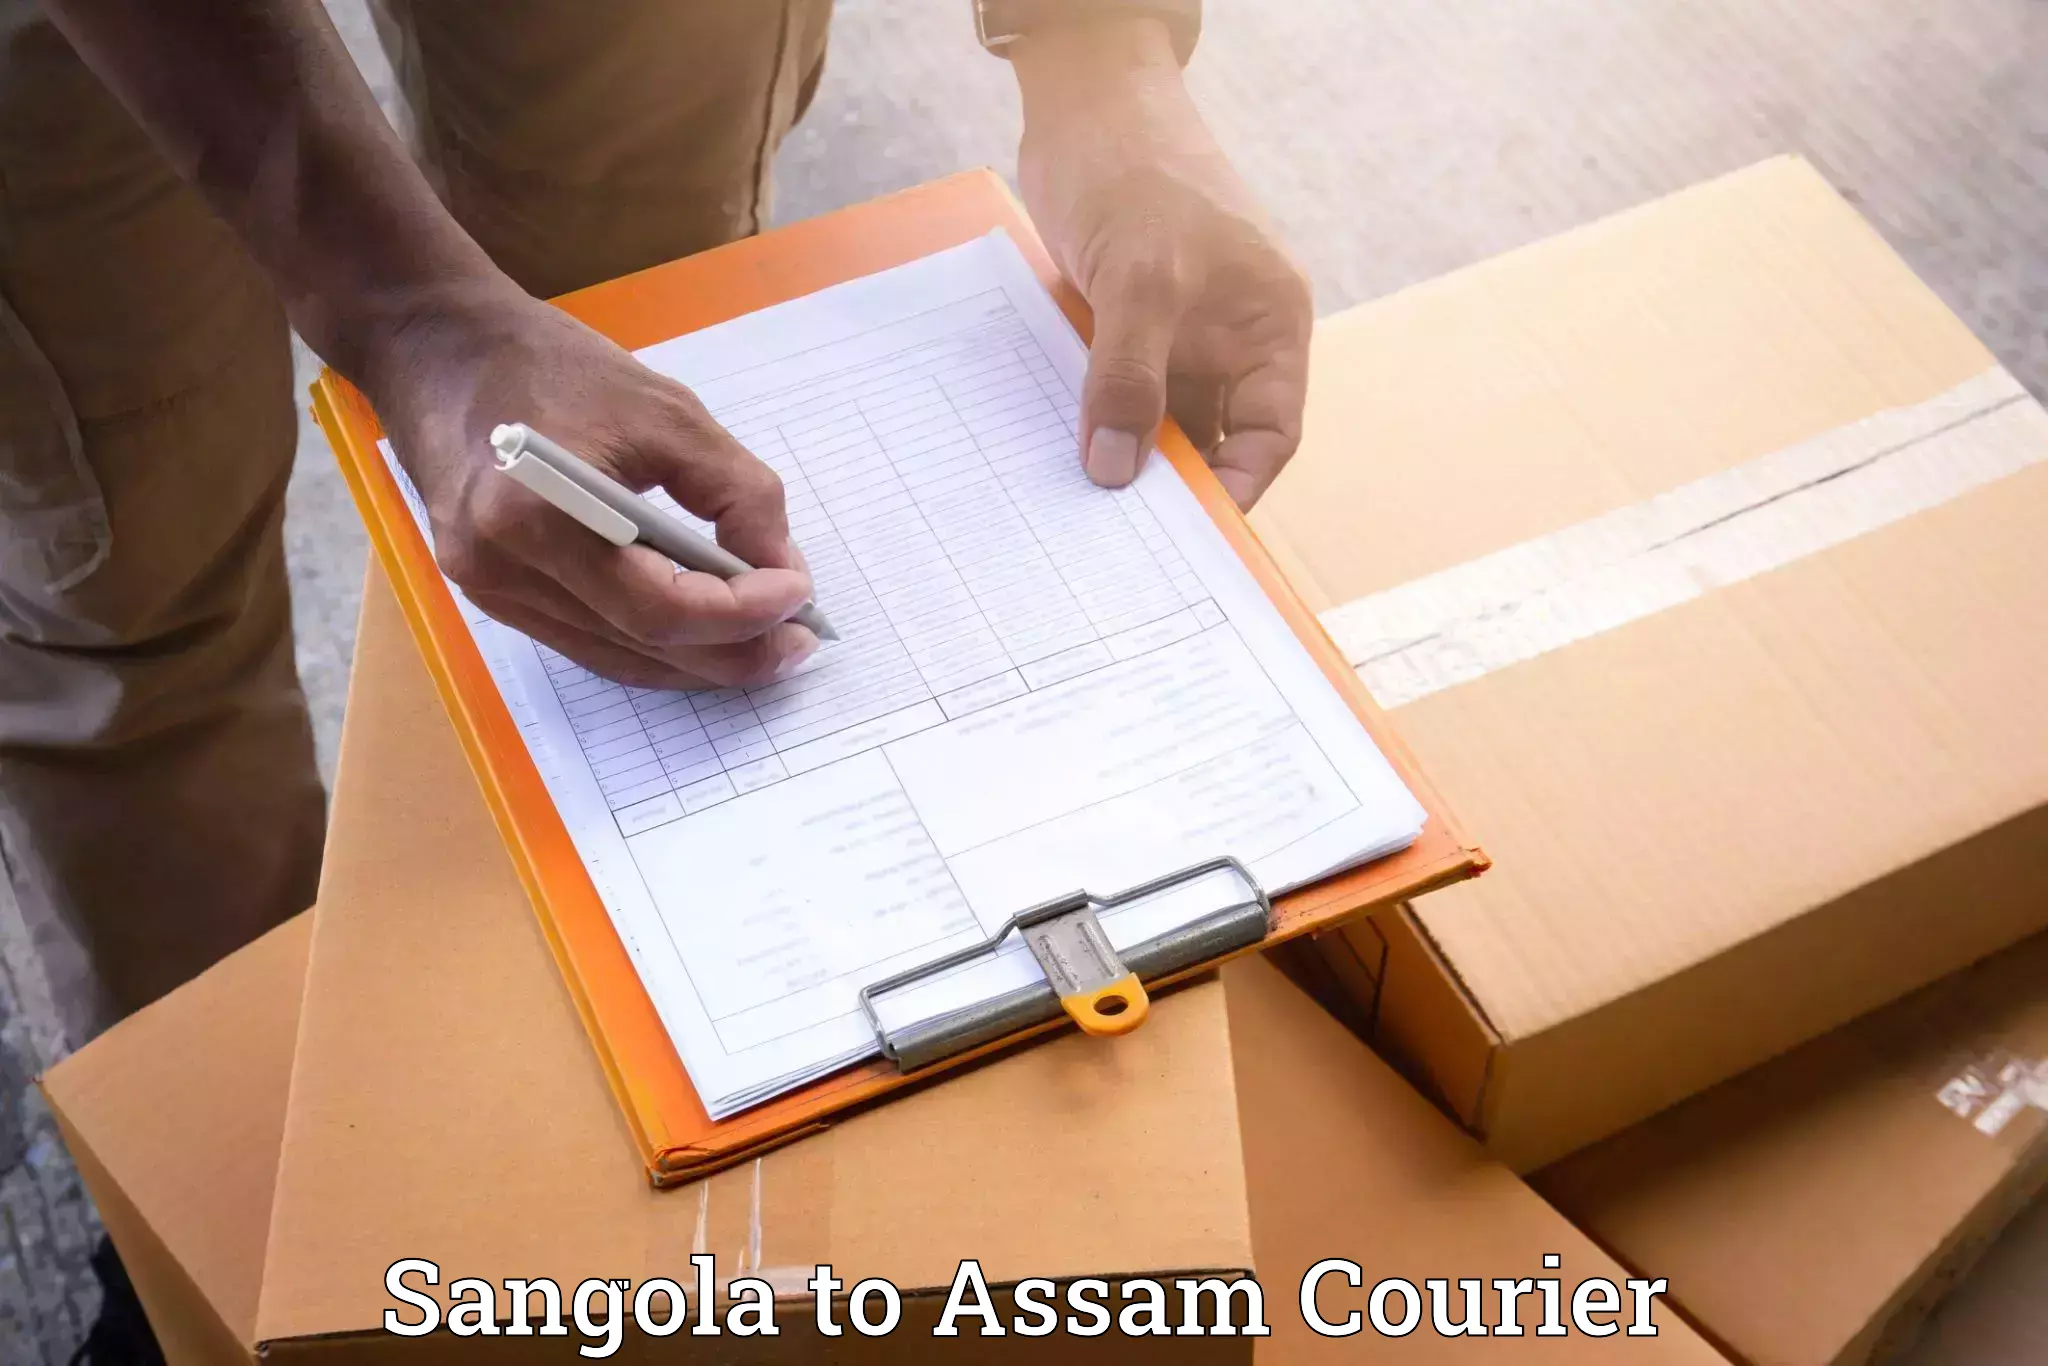 Furniture moving specialists in Sangola to Kabuganj